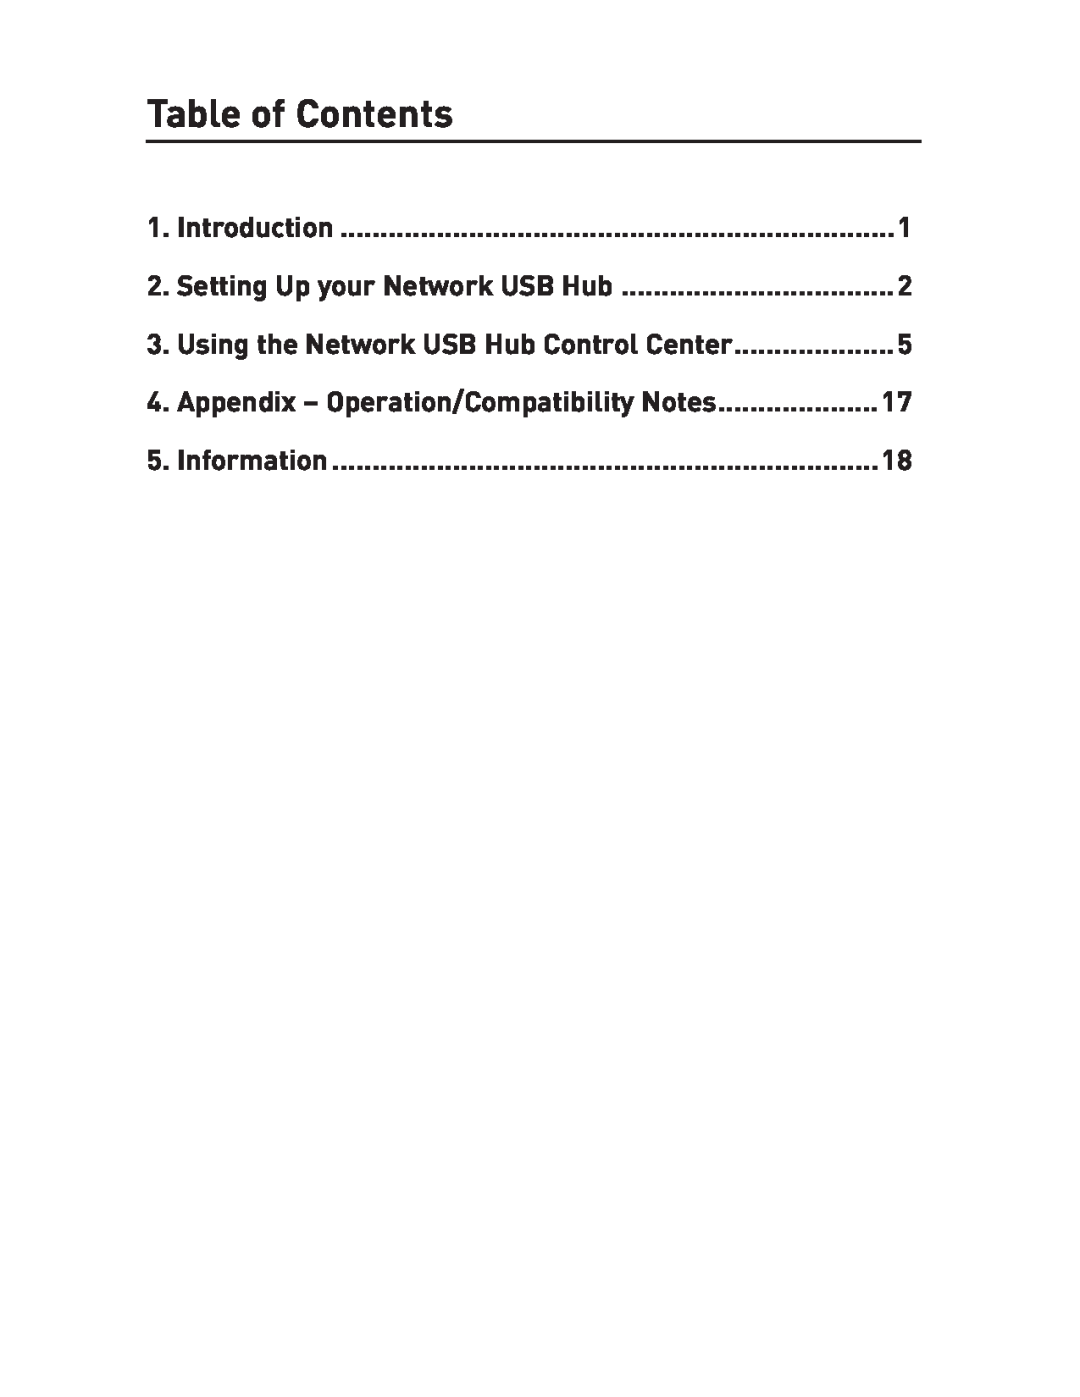 Belkin P75465-A manual Table of Contents, Appendix - Operation/Compatibility Notes, Information, Introduction 